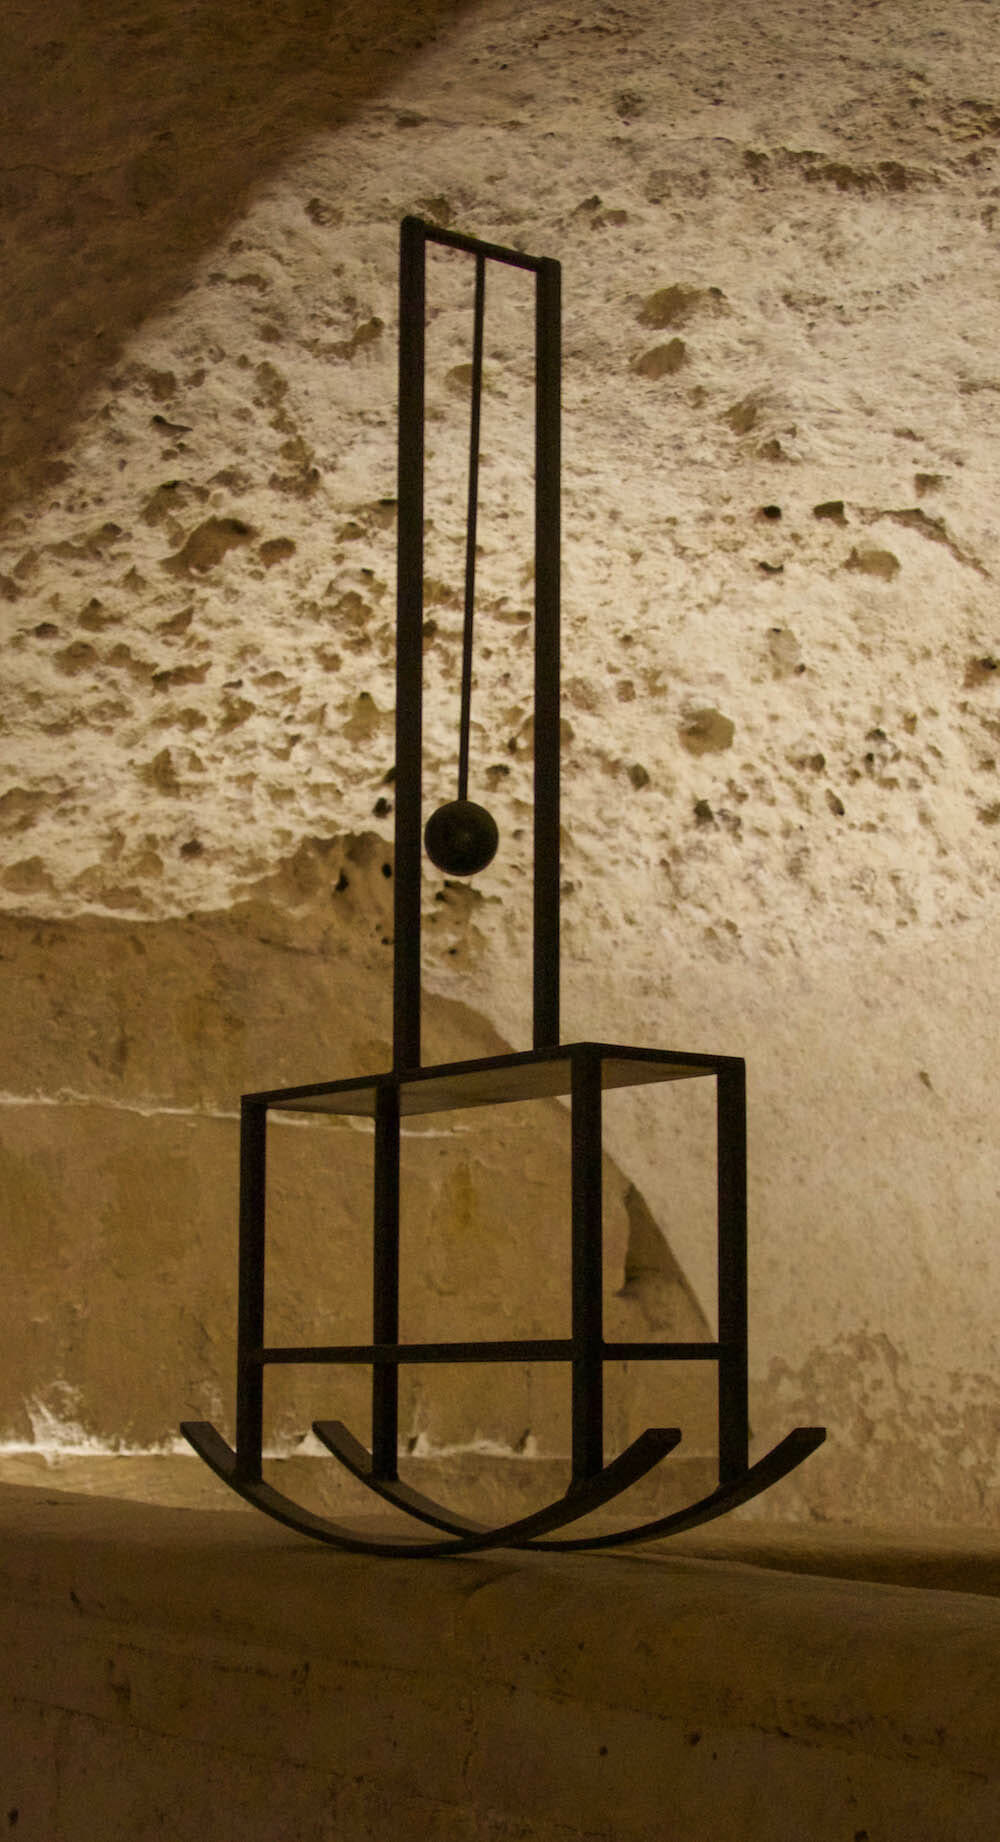 Musma Matera Italy Review Sculpture Finds Its Best Terroire